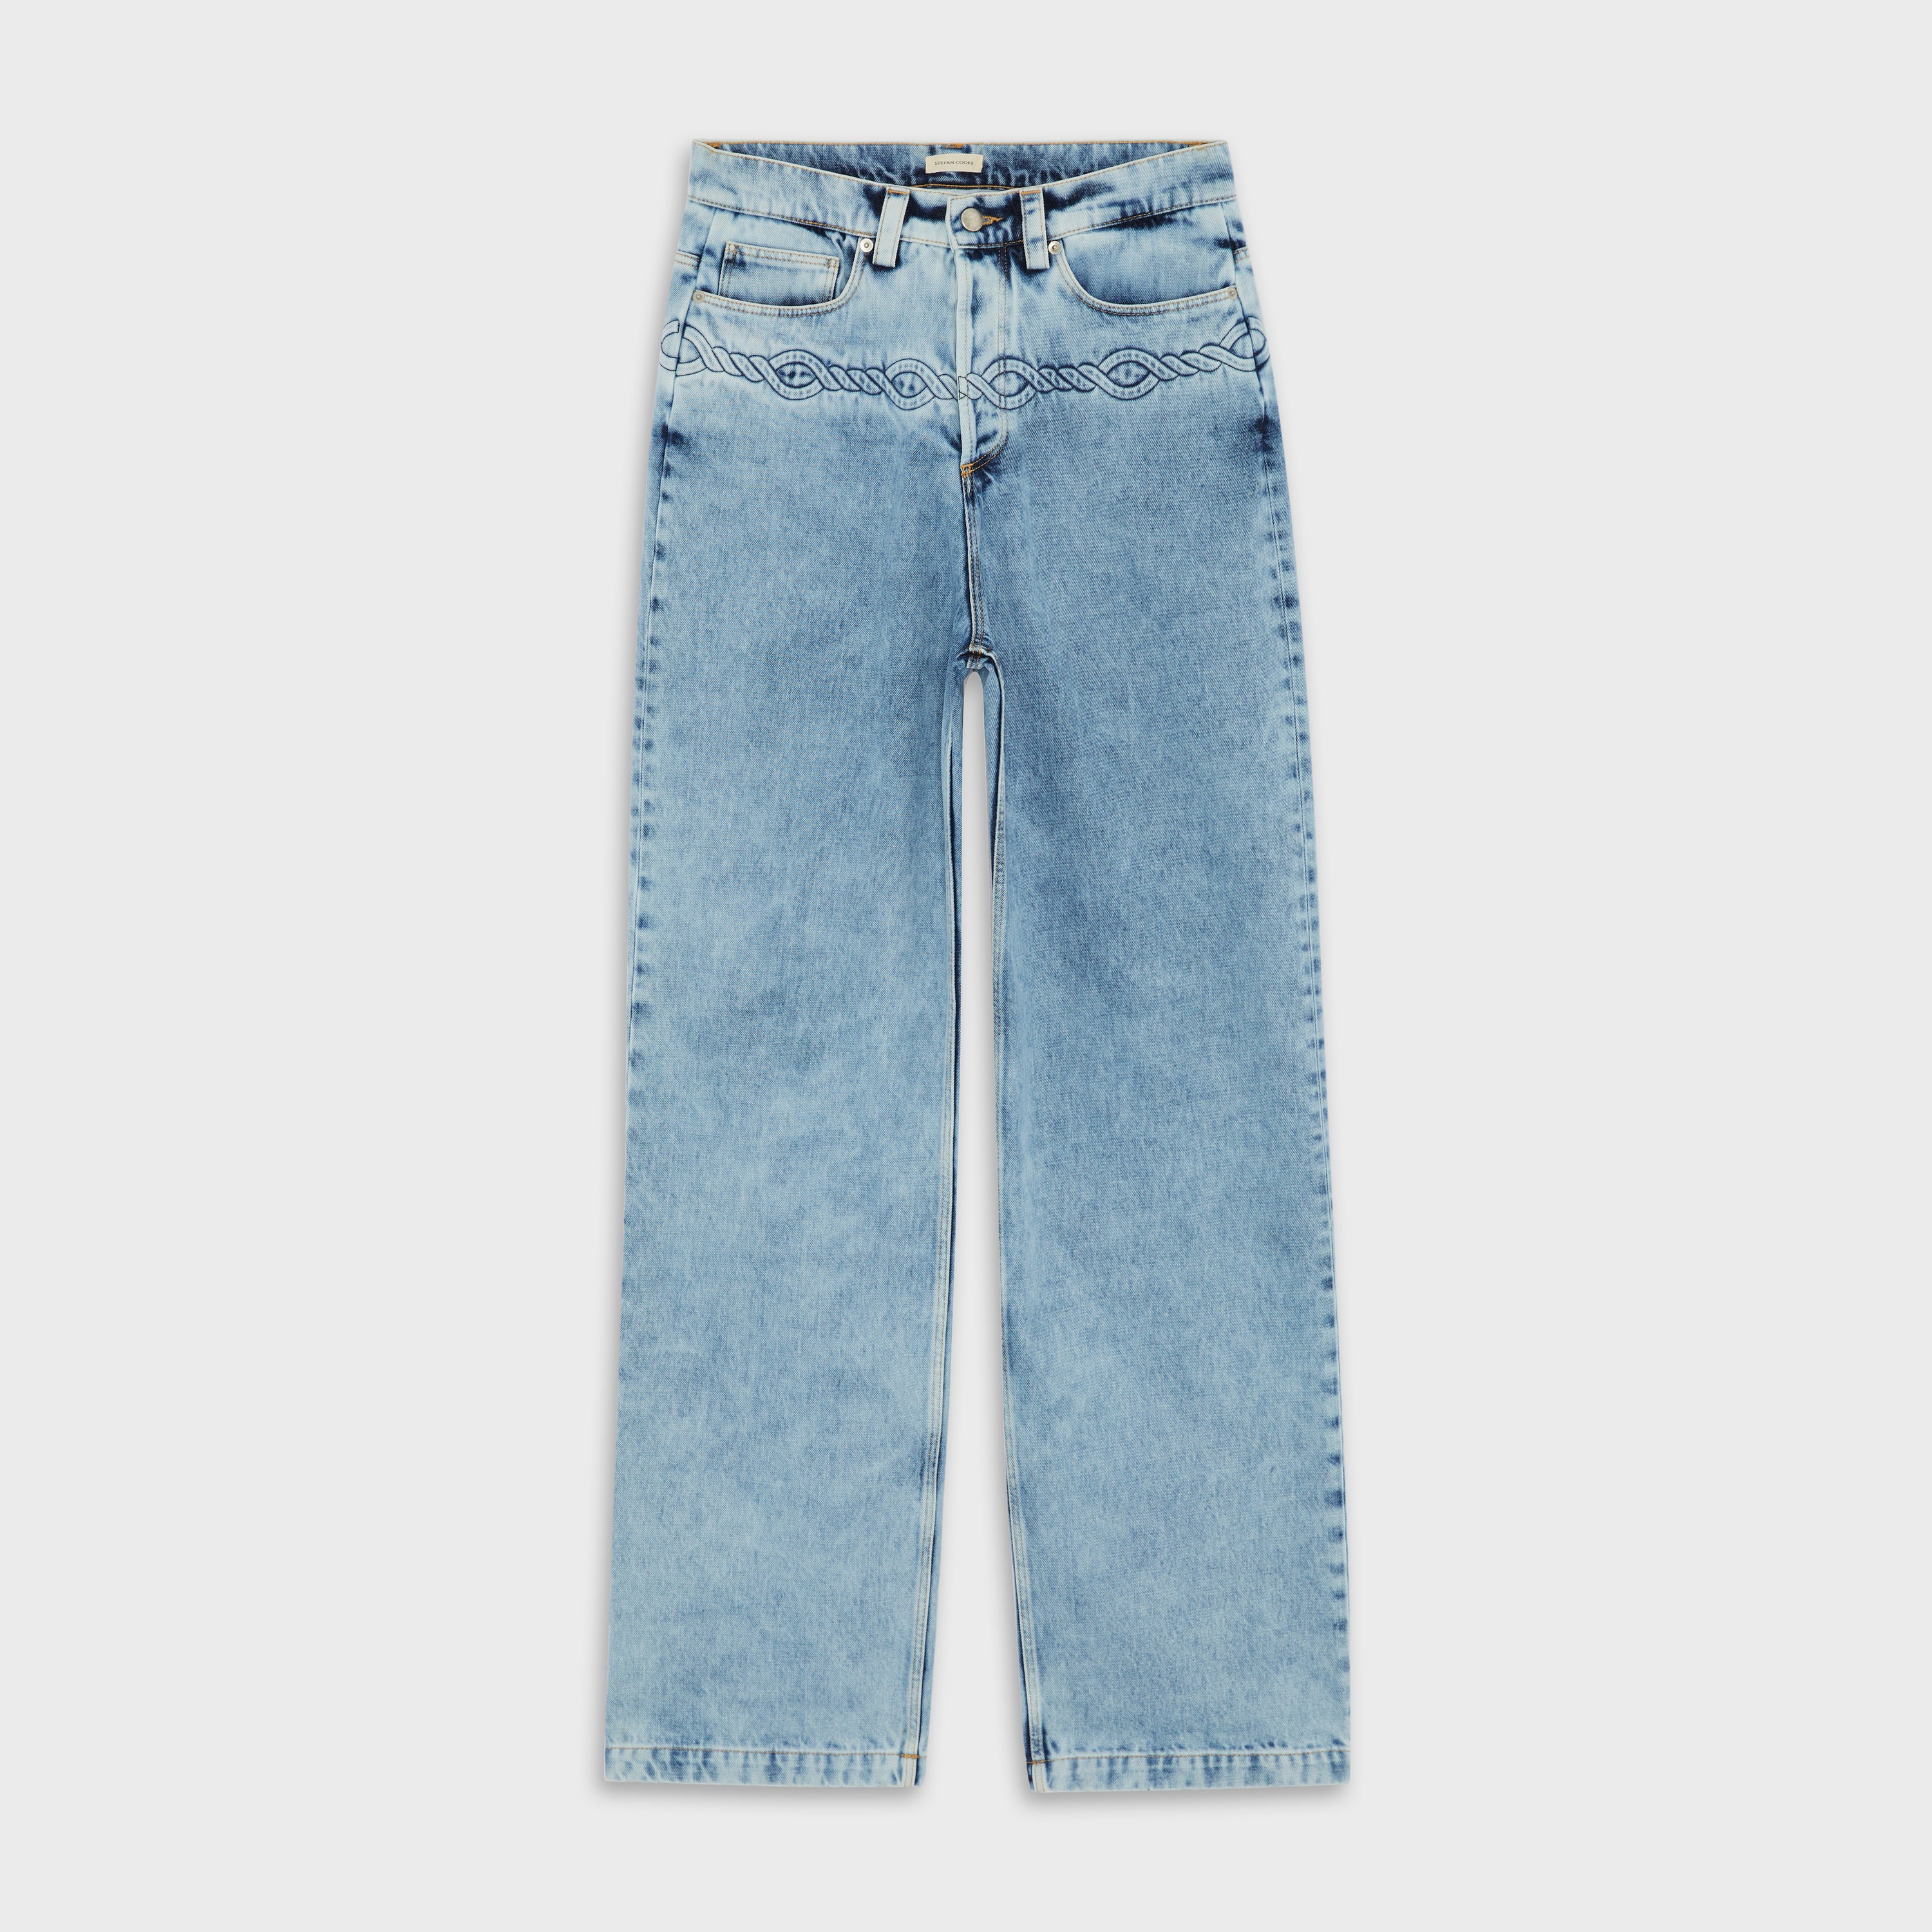 Cable Corded Jeans in Washed Indigo